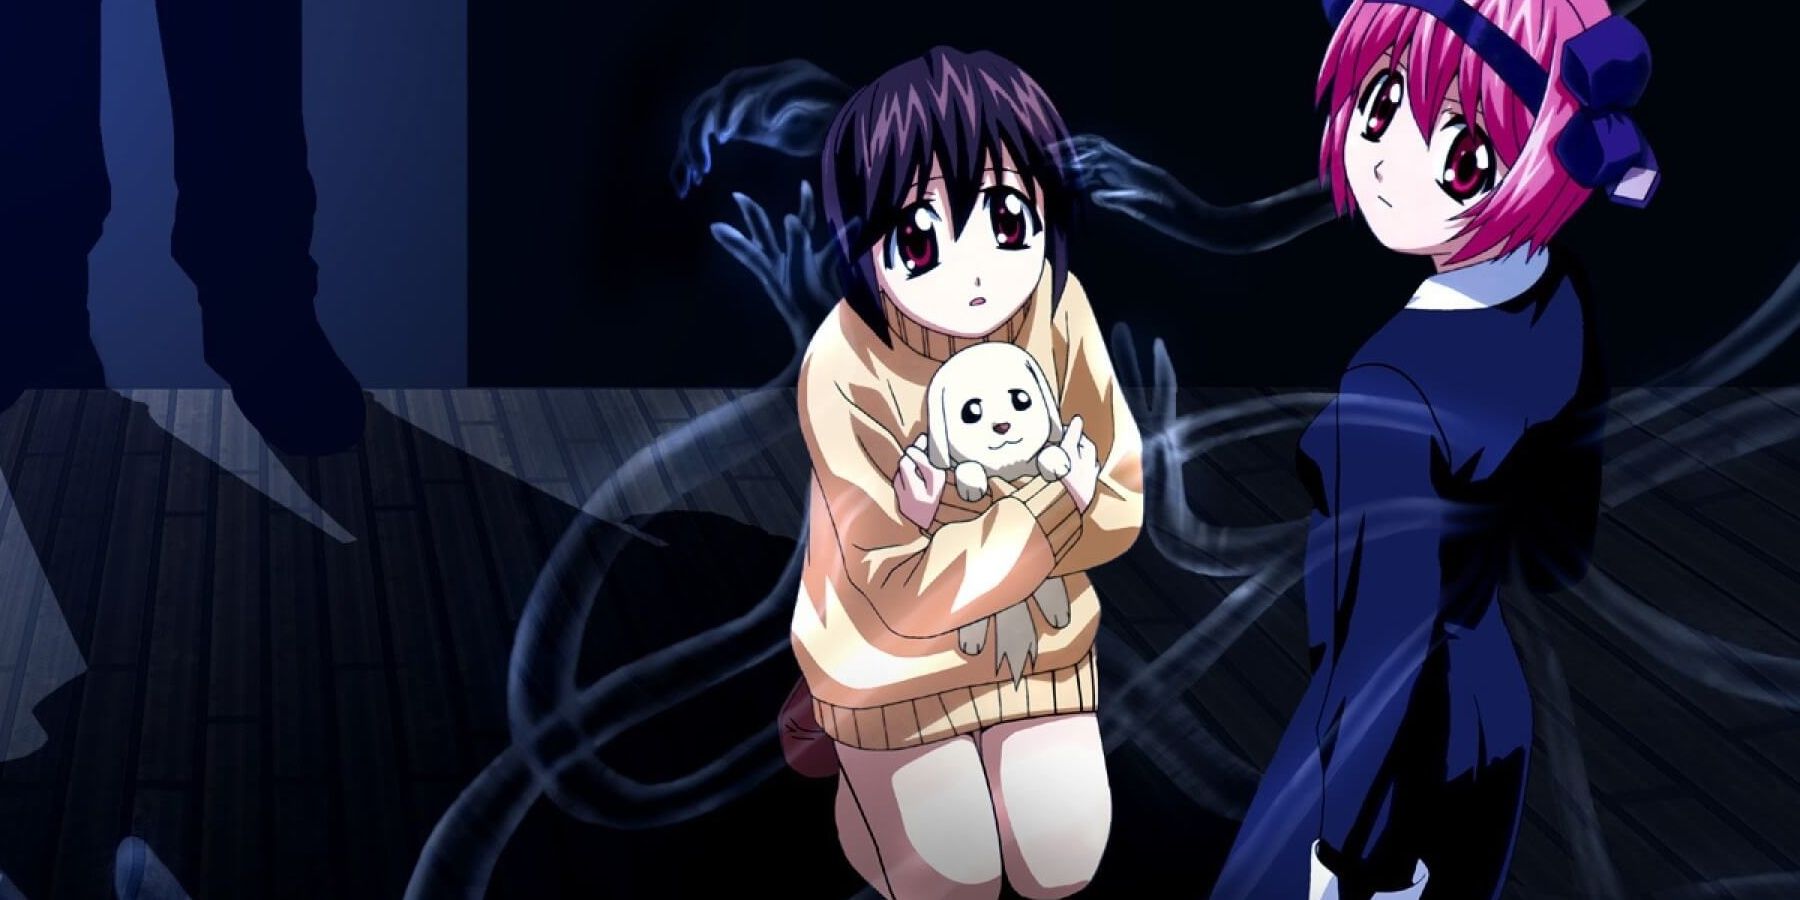 Elfin Lied's Mayu clutching a puppy on her knees with Lucy looking back over her shoulder.